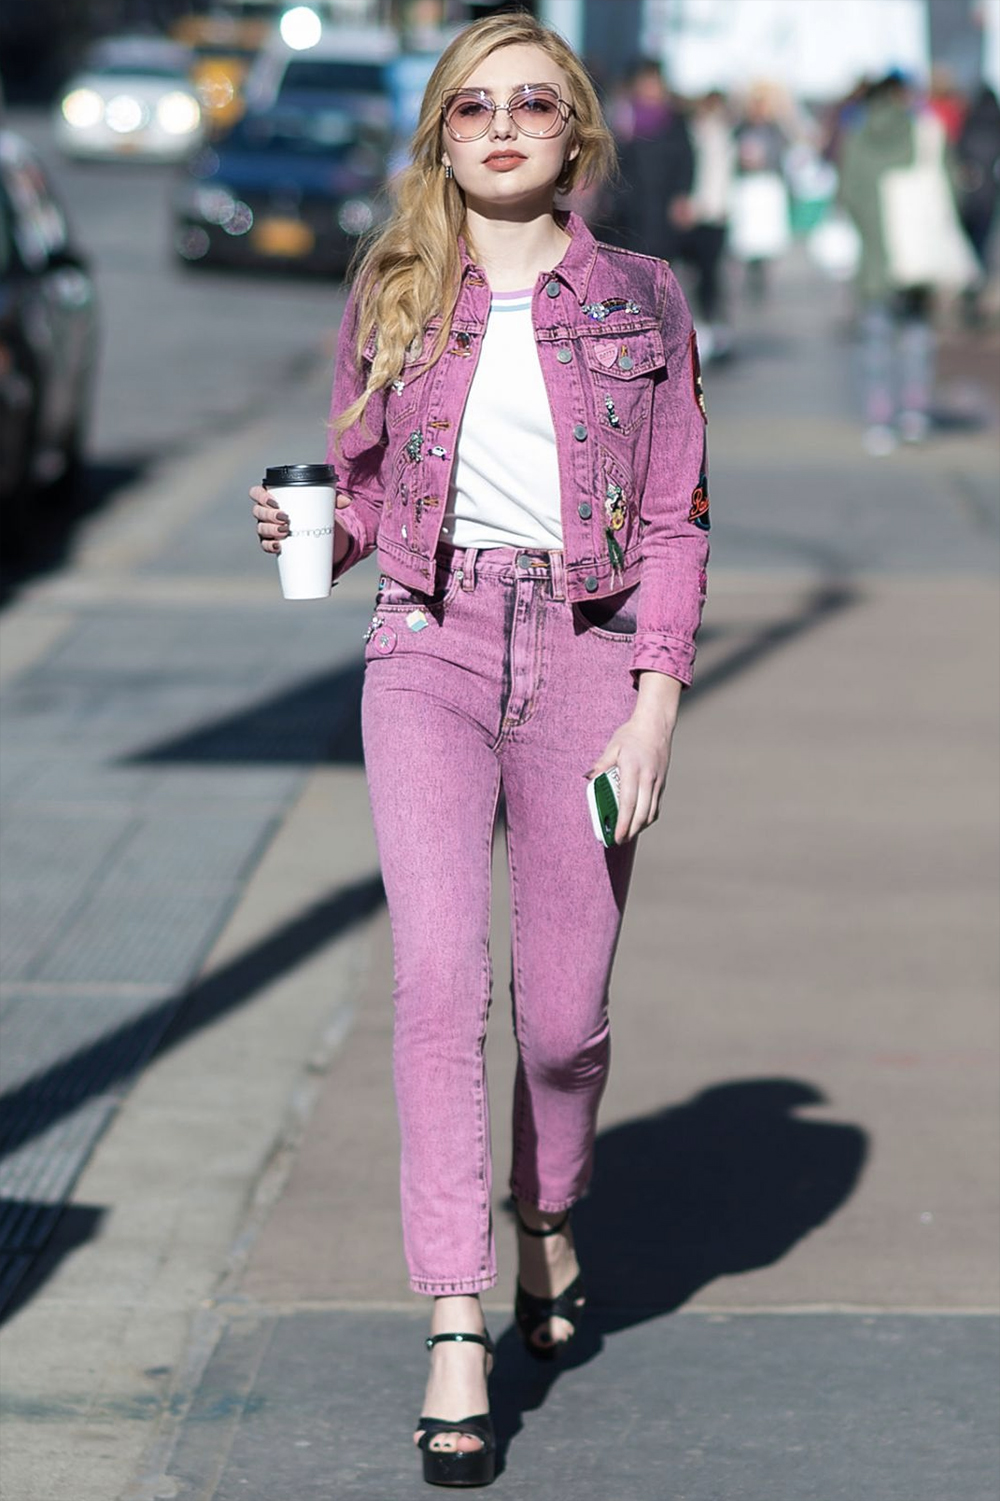 peyton list daily outfit